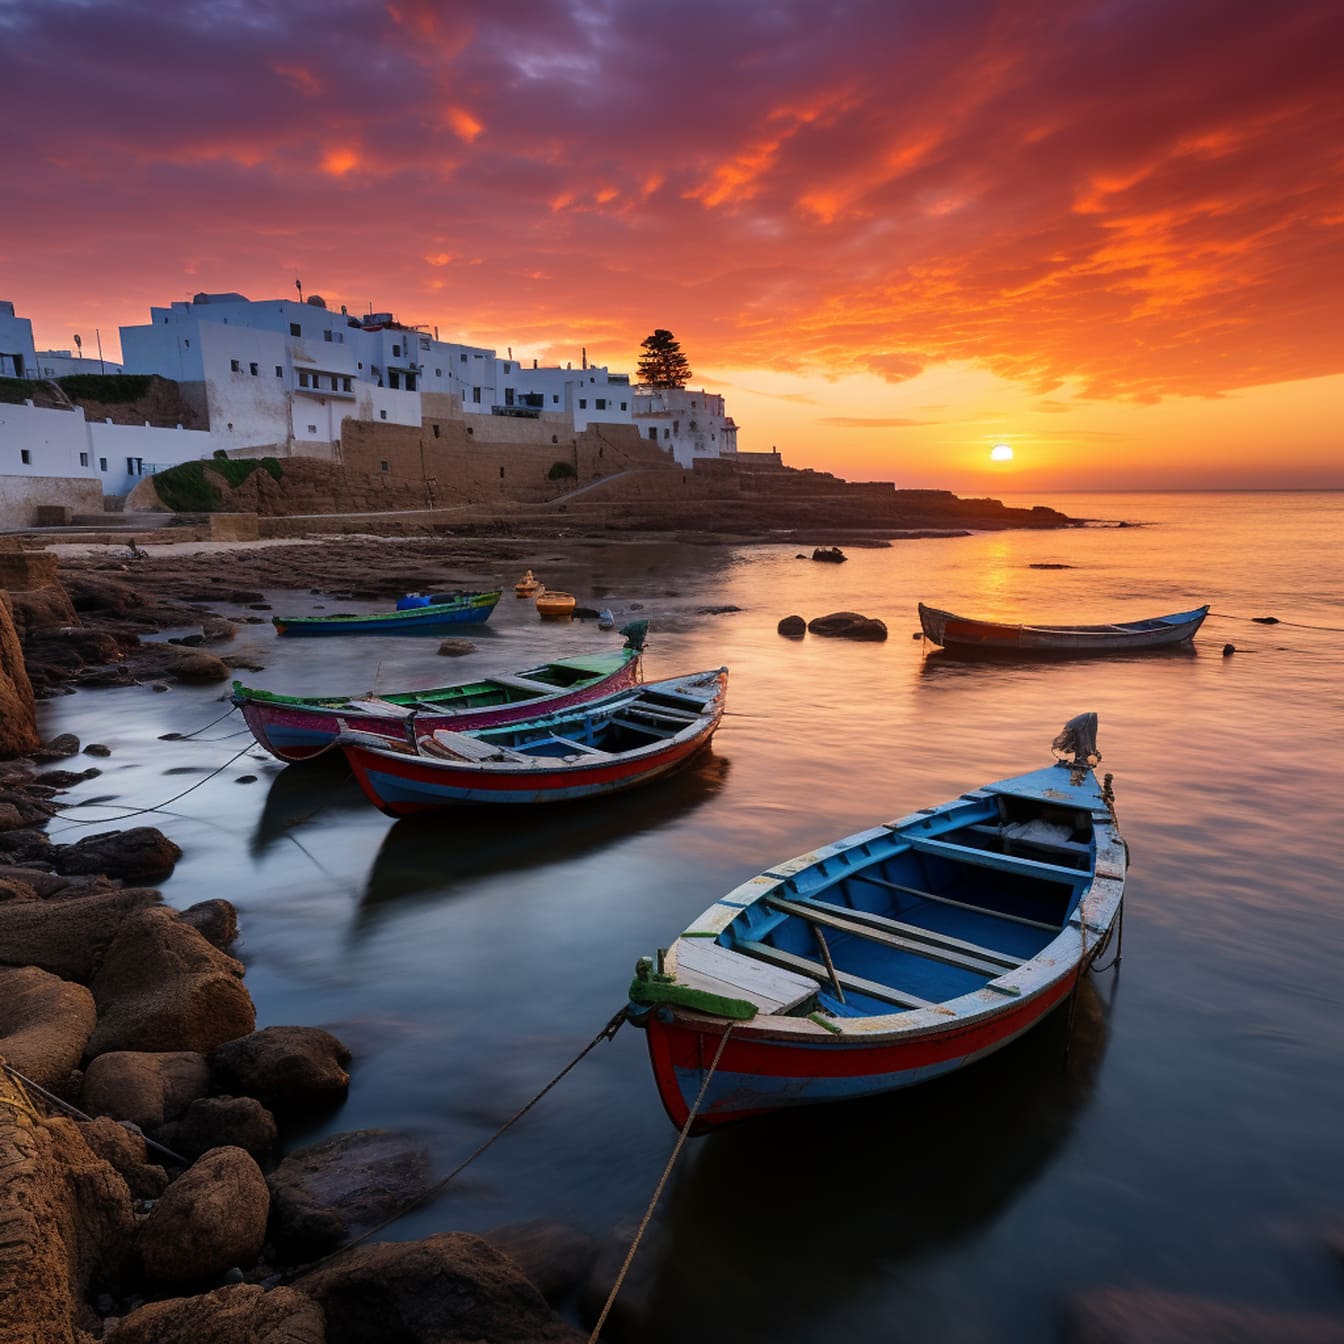 Boats at harbor with a historic village in the background at sunset